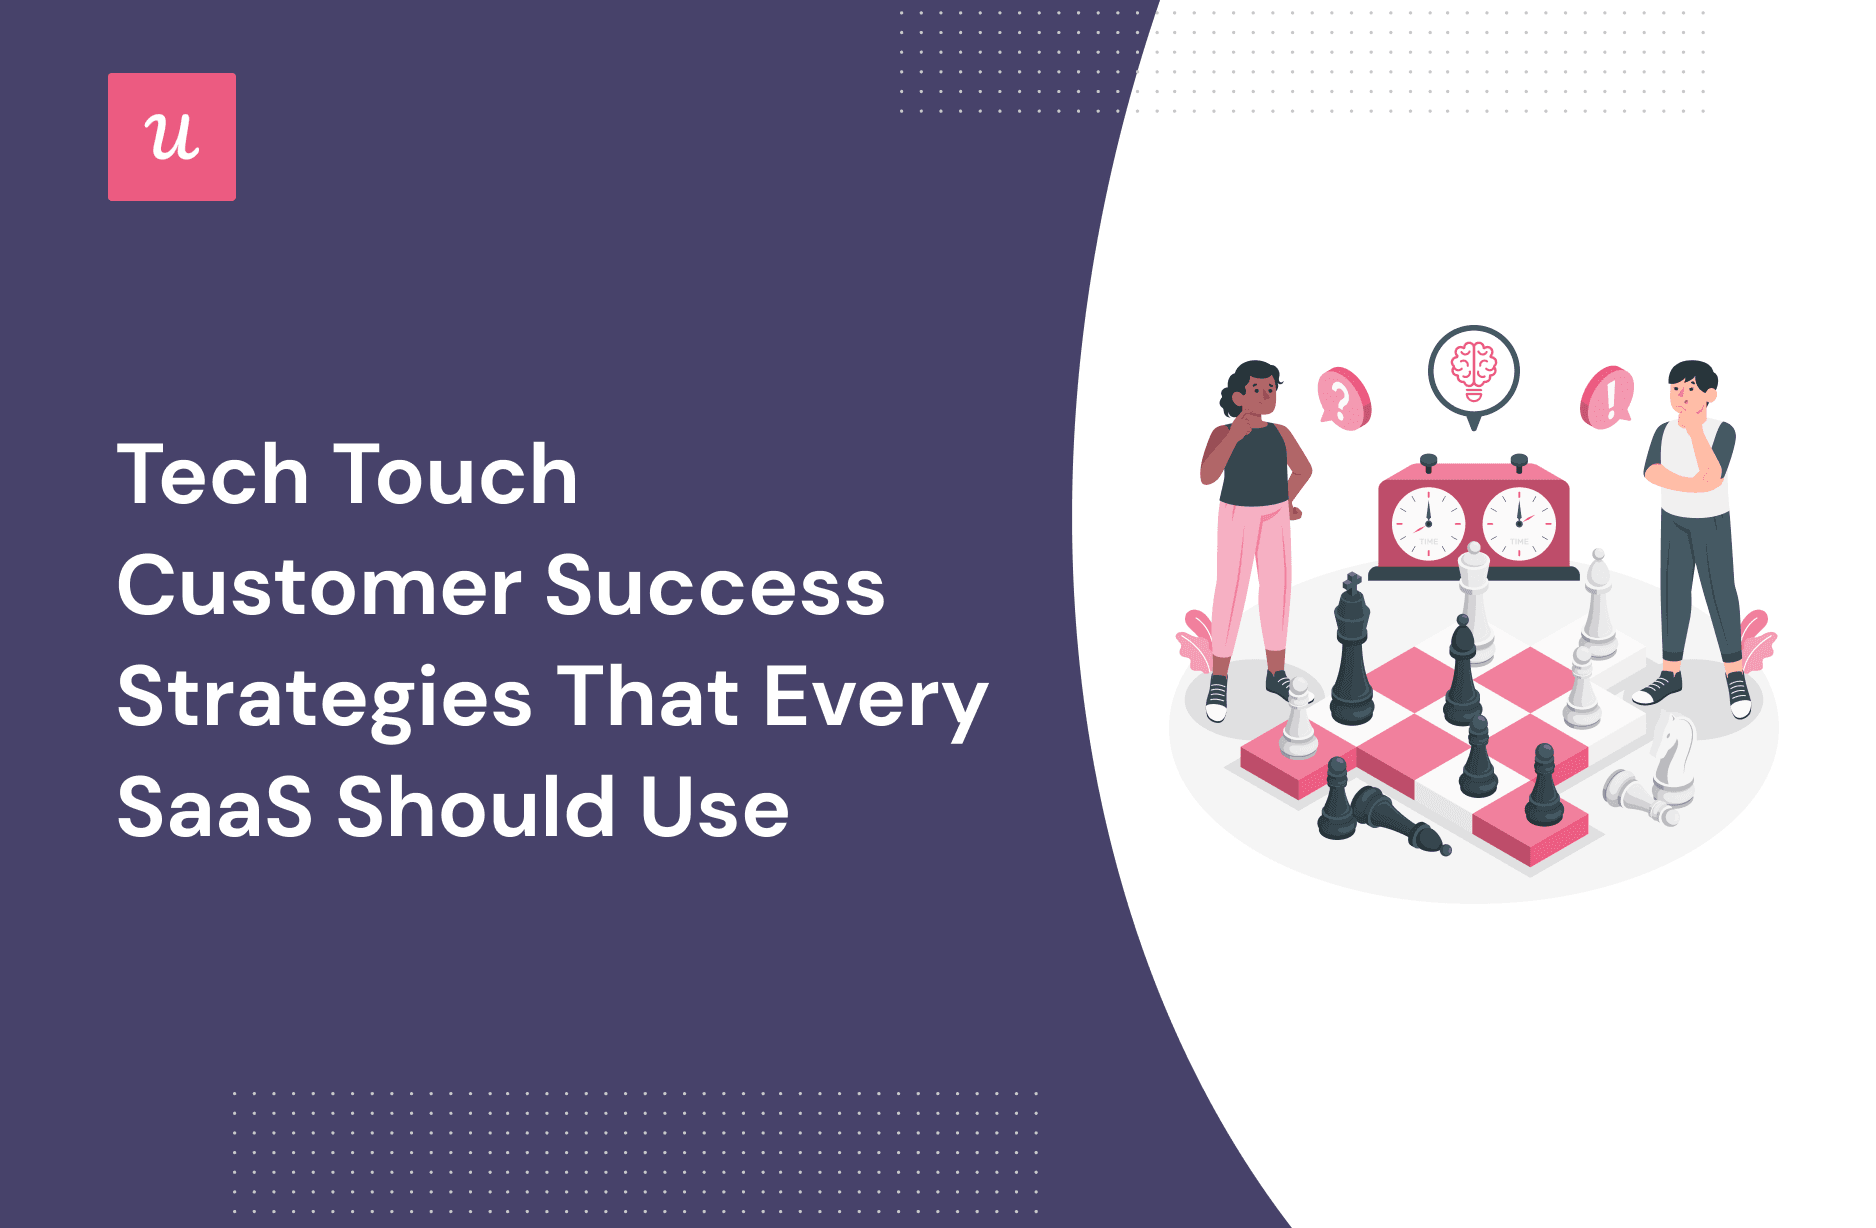 Tech Touch Customer Success Strategies That Every SaaS Should Use cover